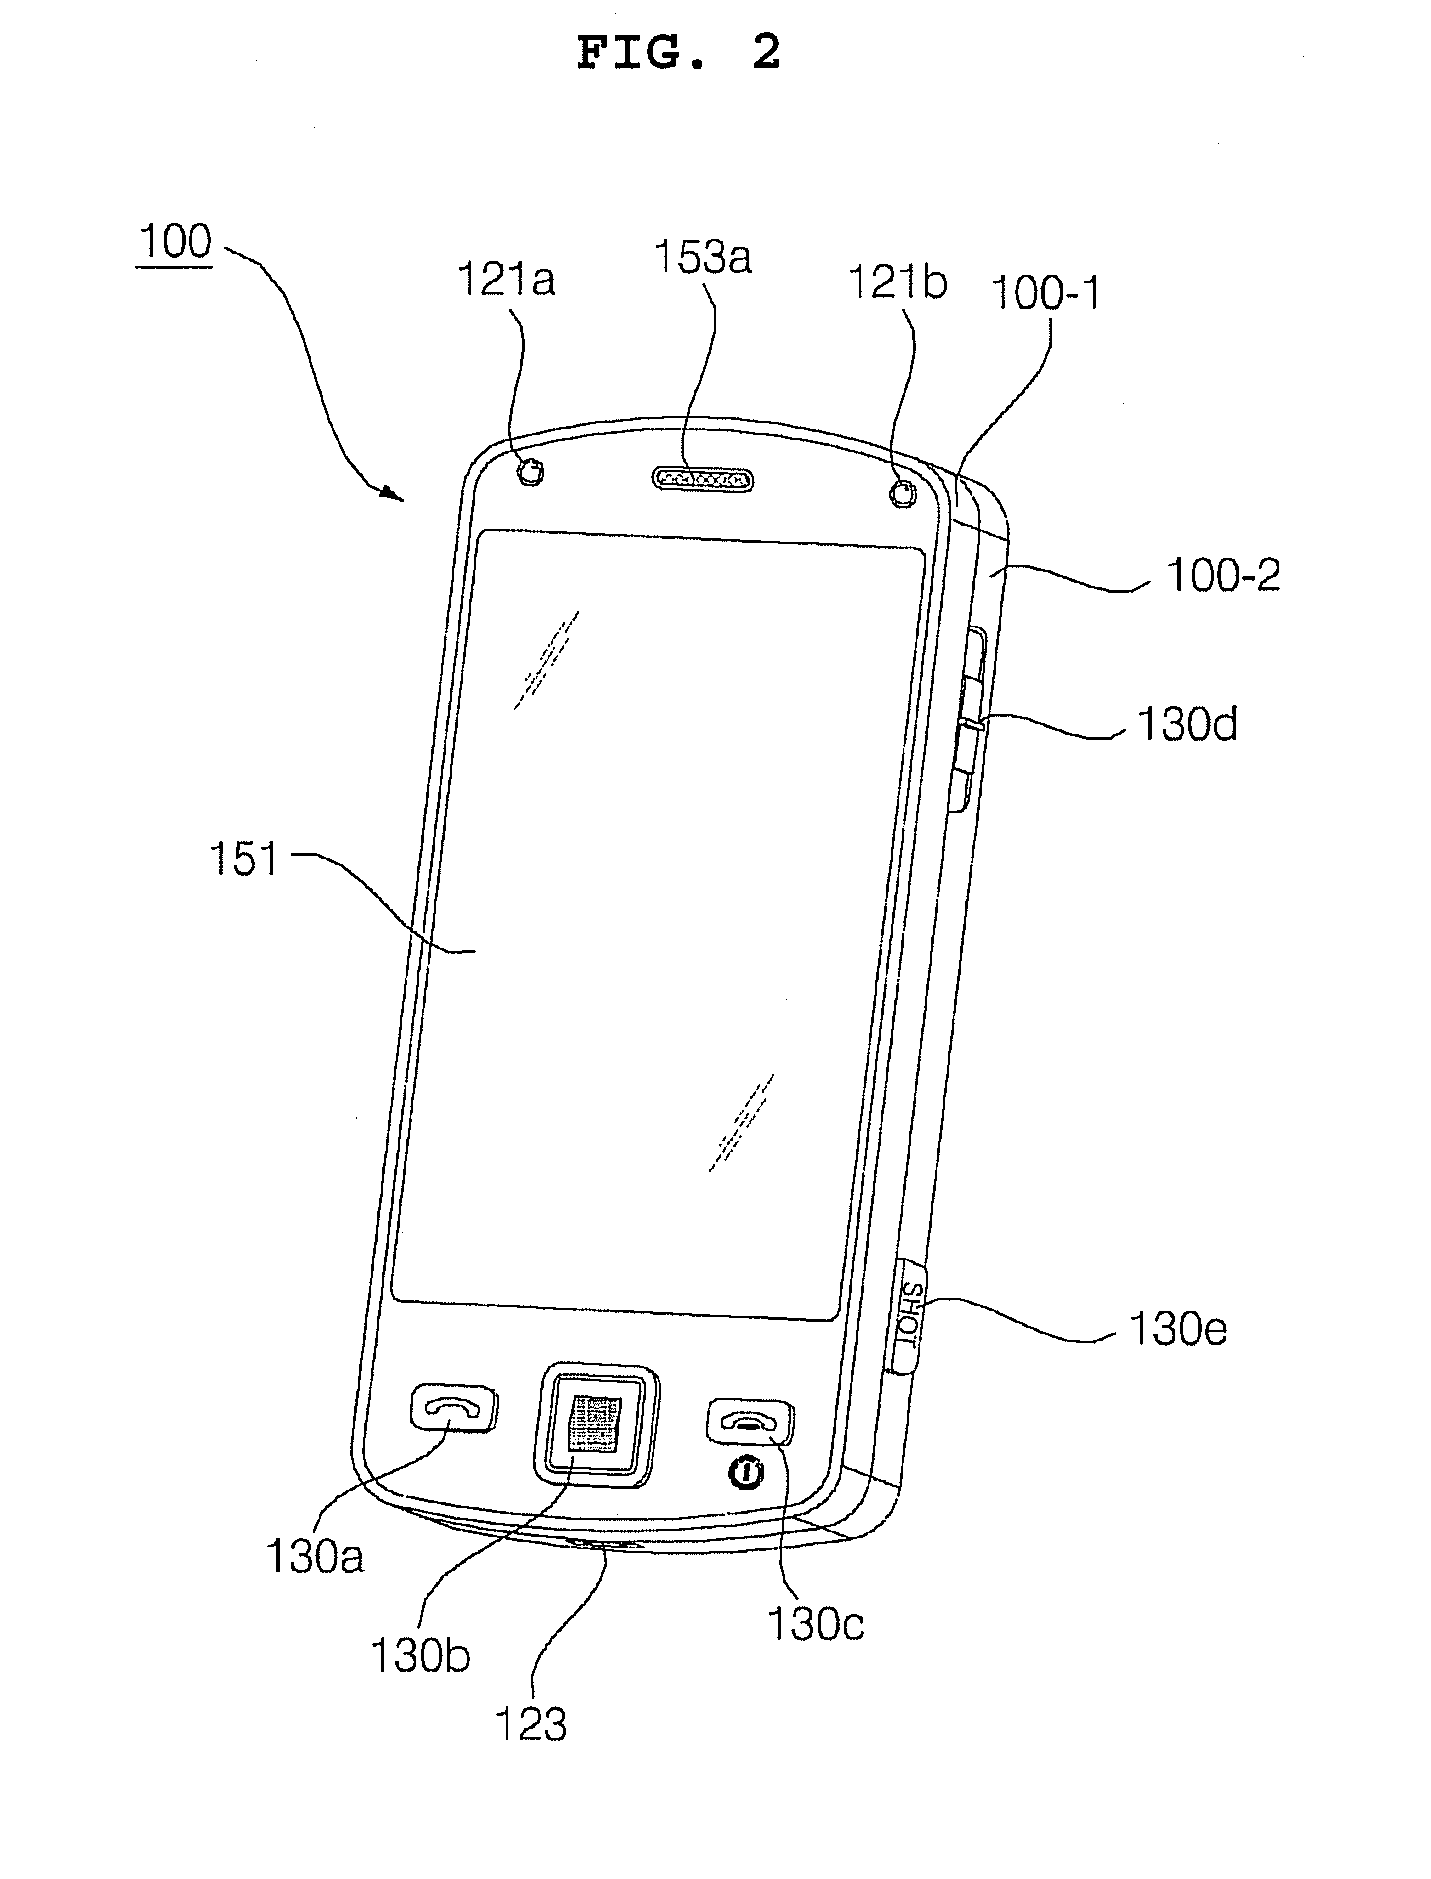 Mobile terminal and method of controlling operation thereof